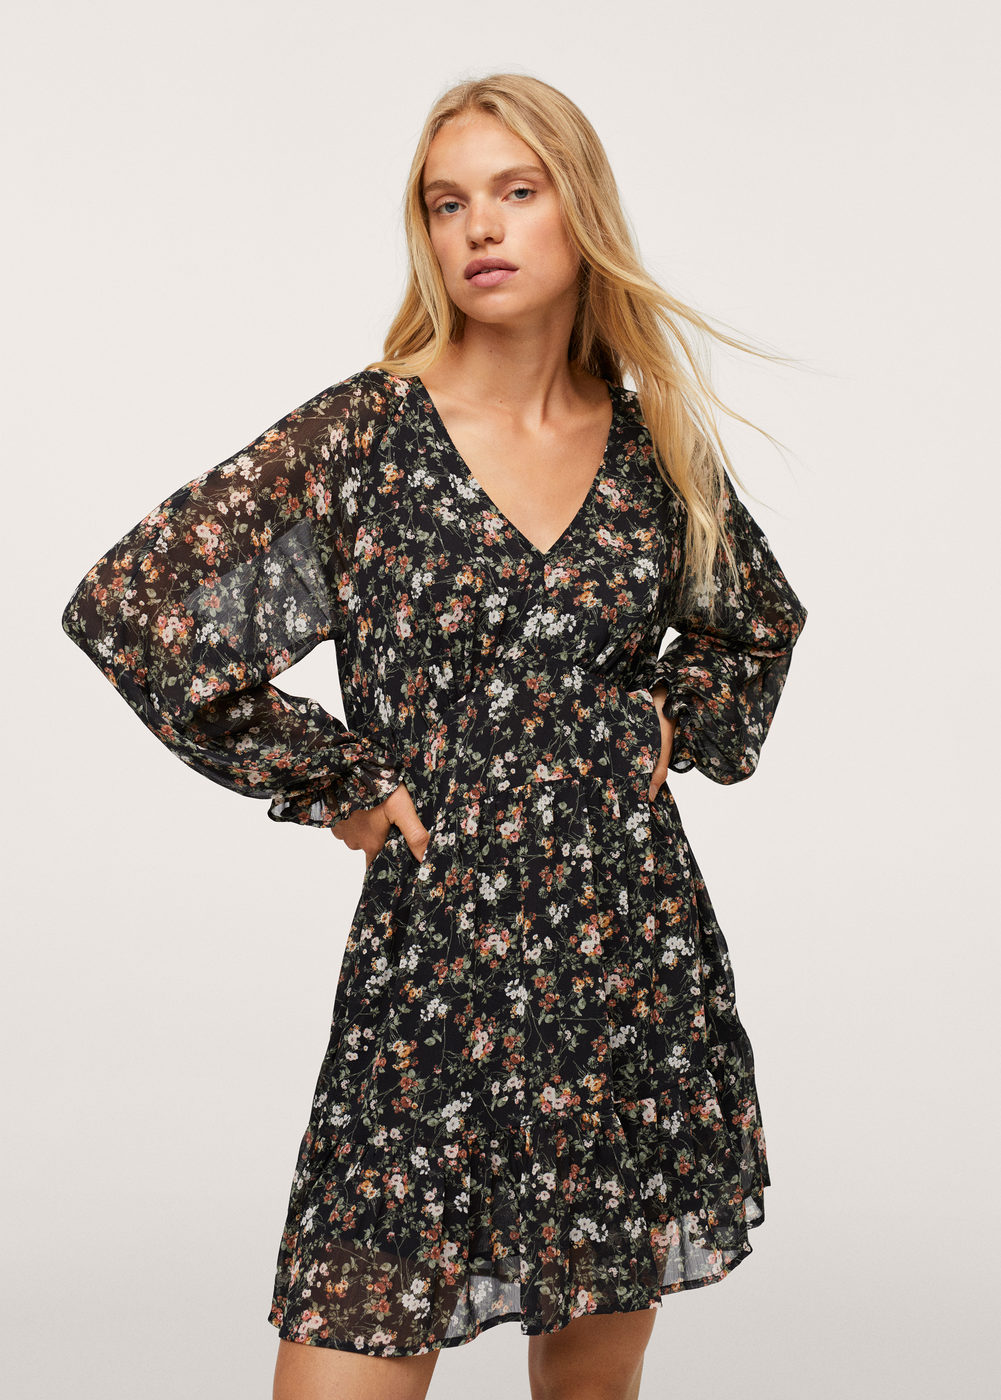 24 Pretty Boho Dresses Perfect for Fall | Who What Wear